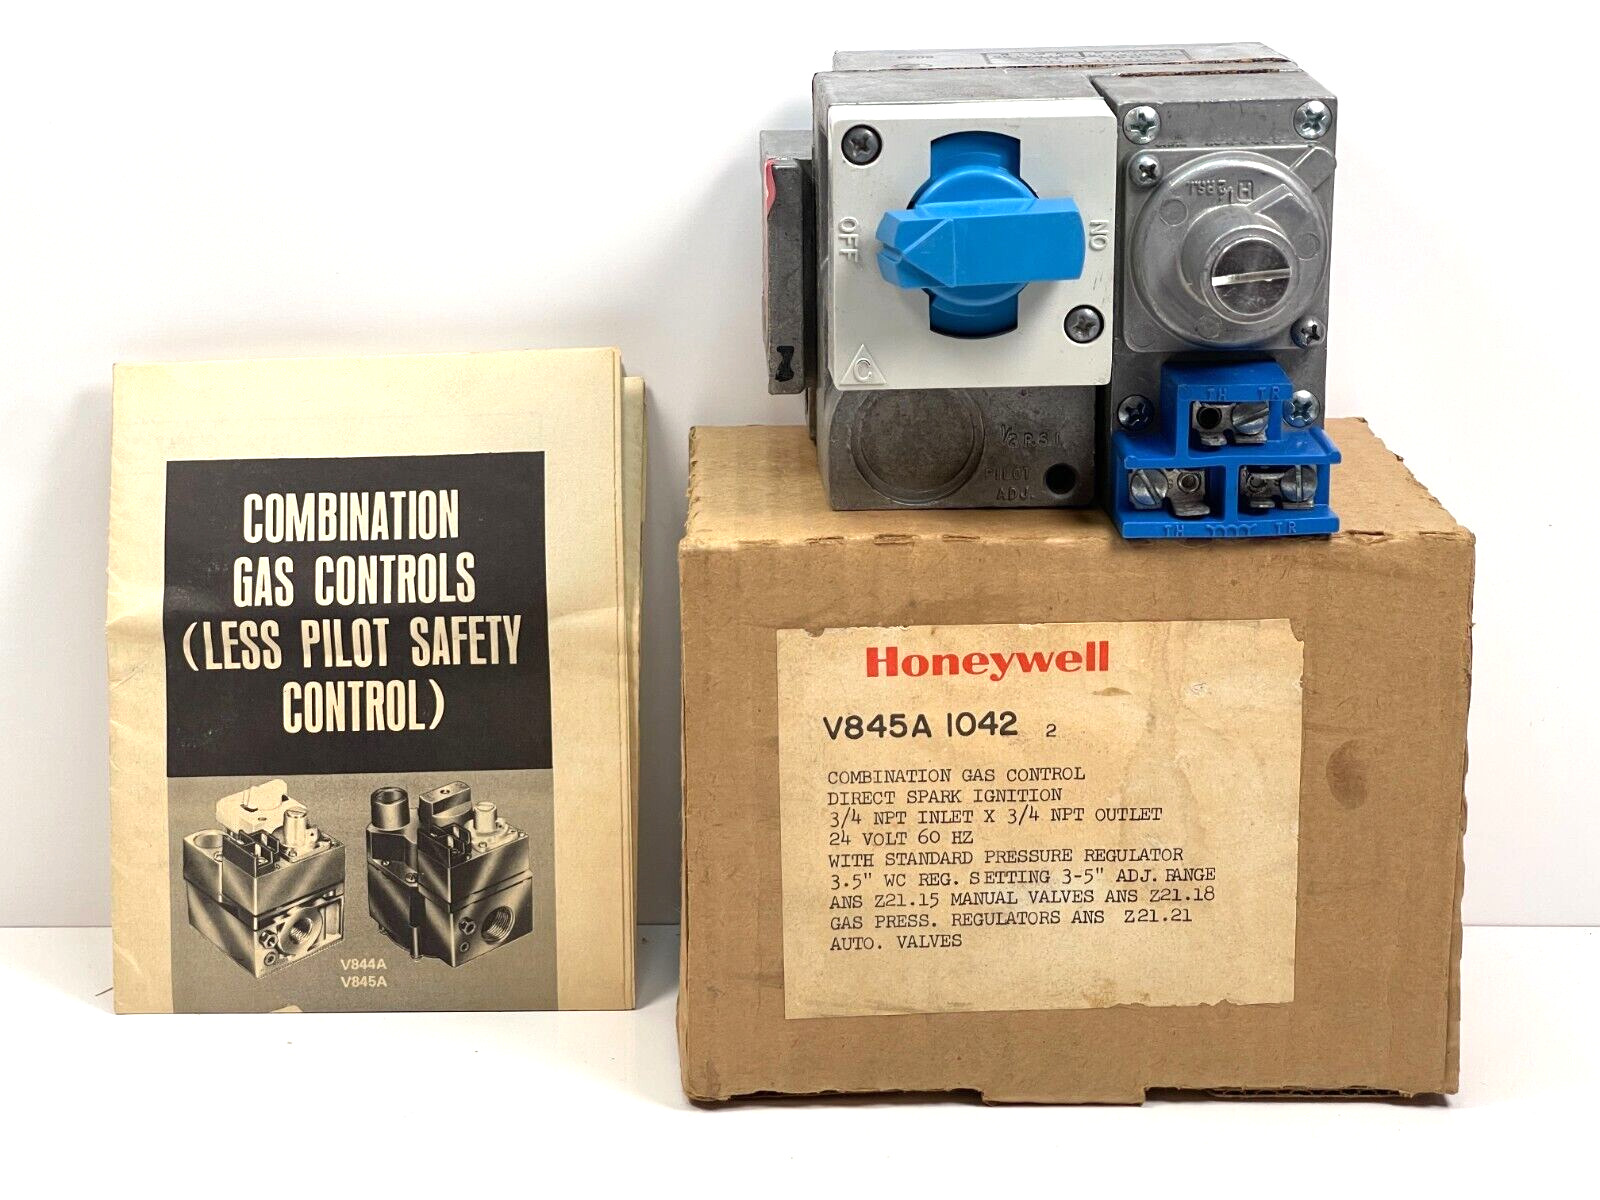 Honeywell Combination Gas Control Direct Spark Ingnition V845A 1042